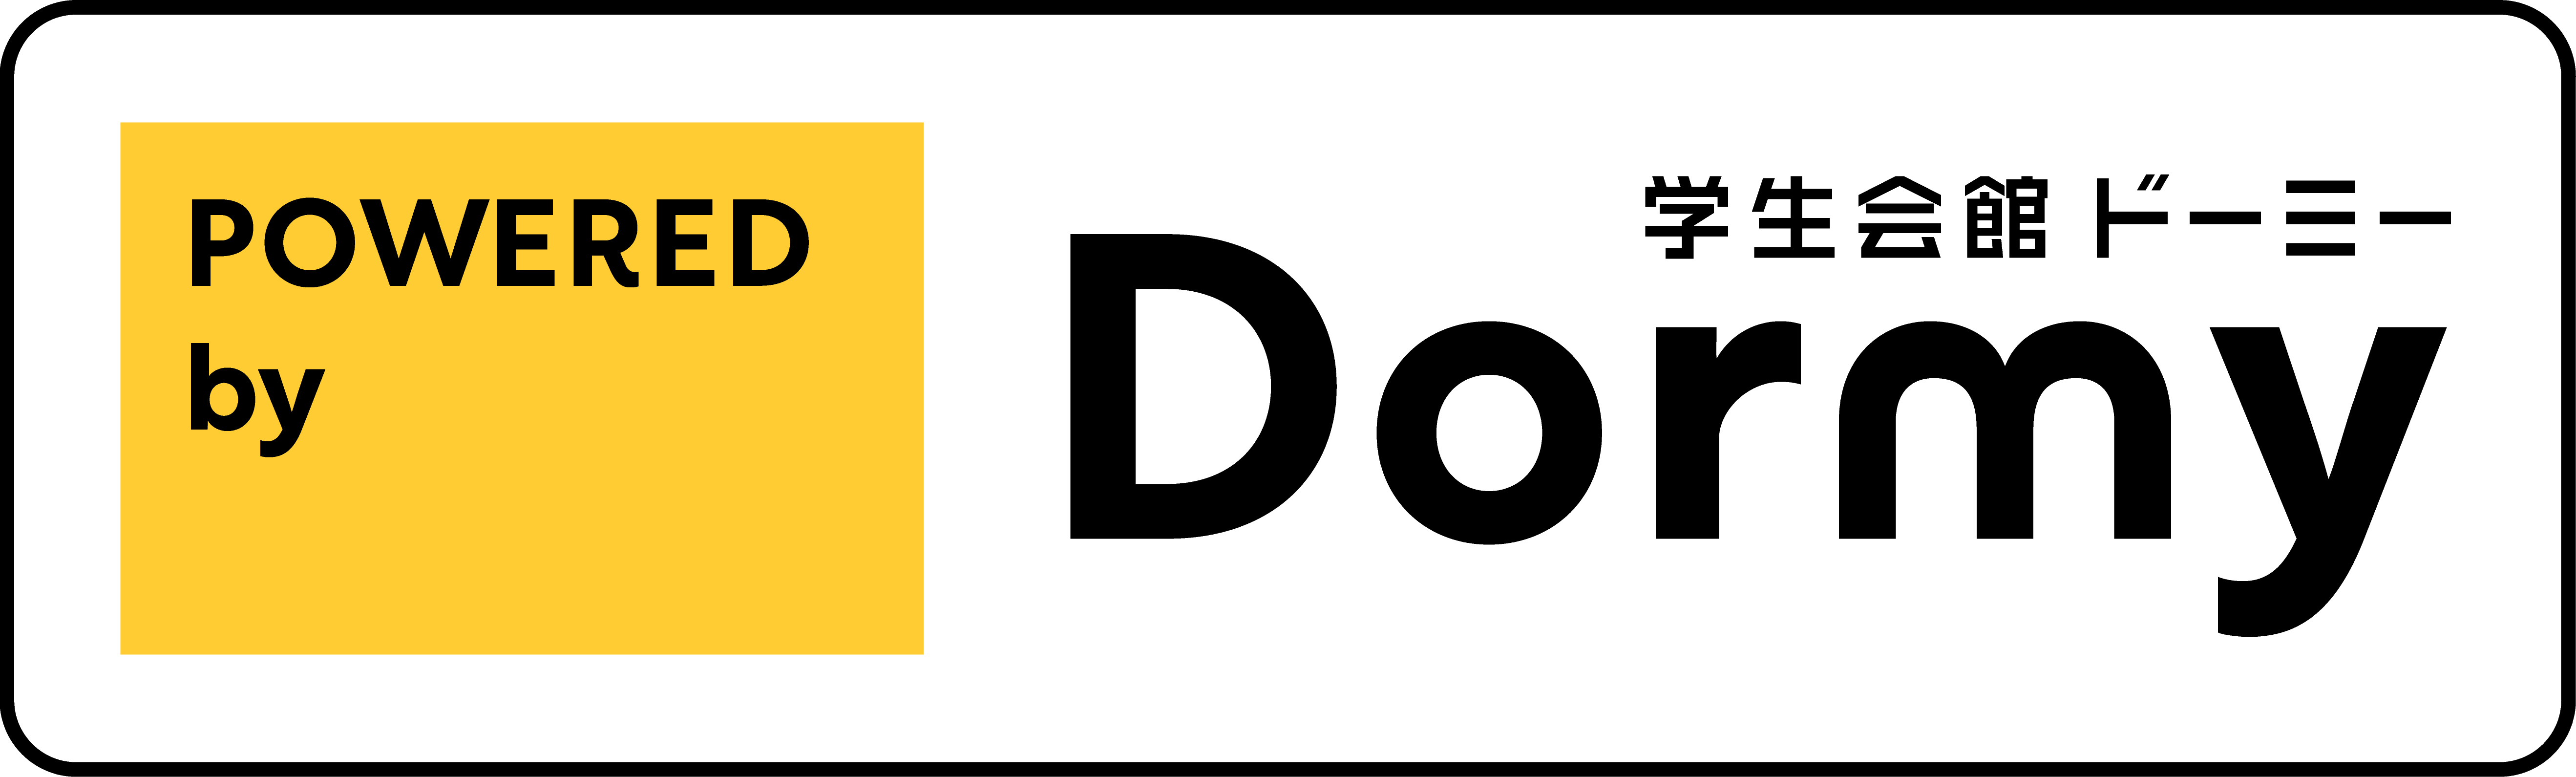 Powered By Dormy